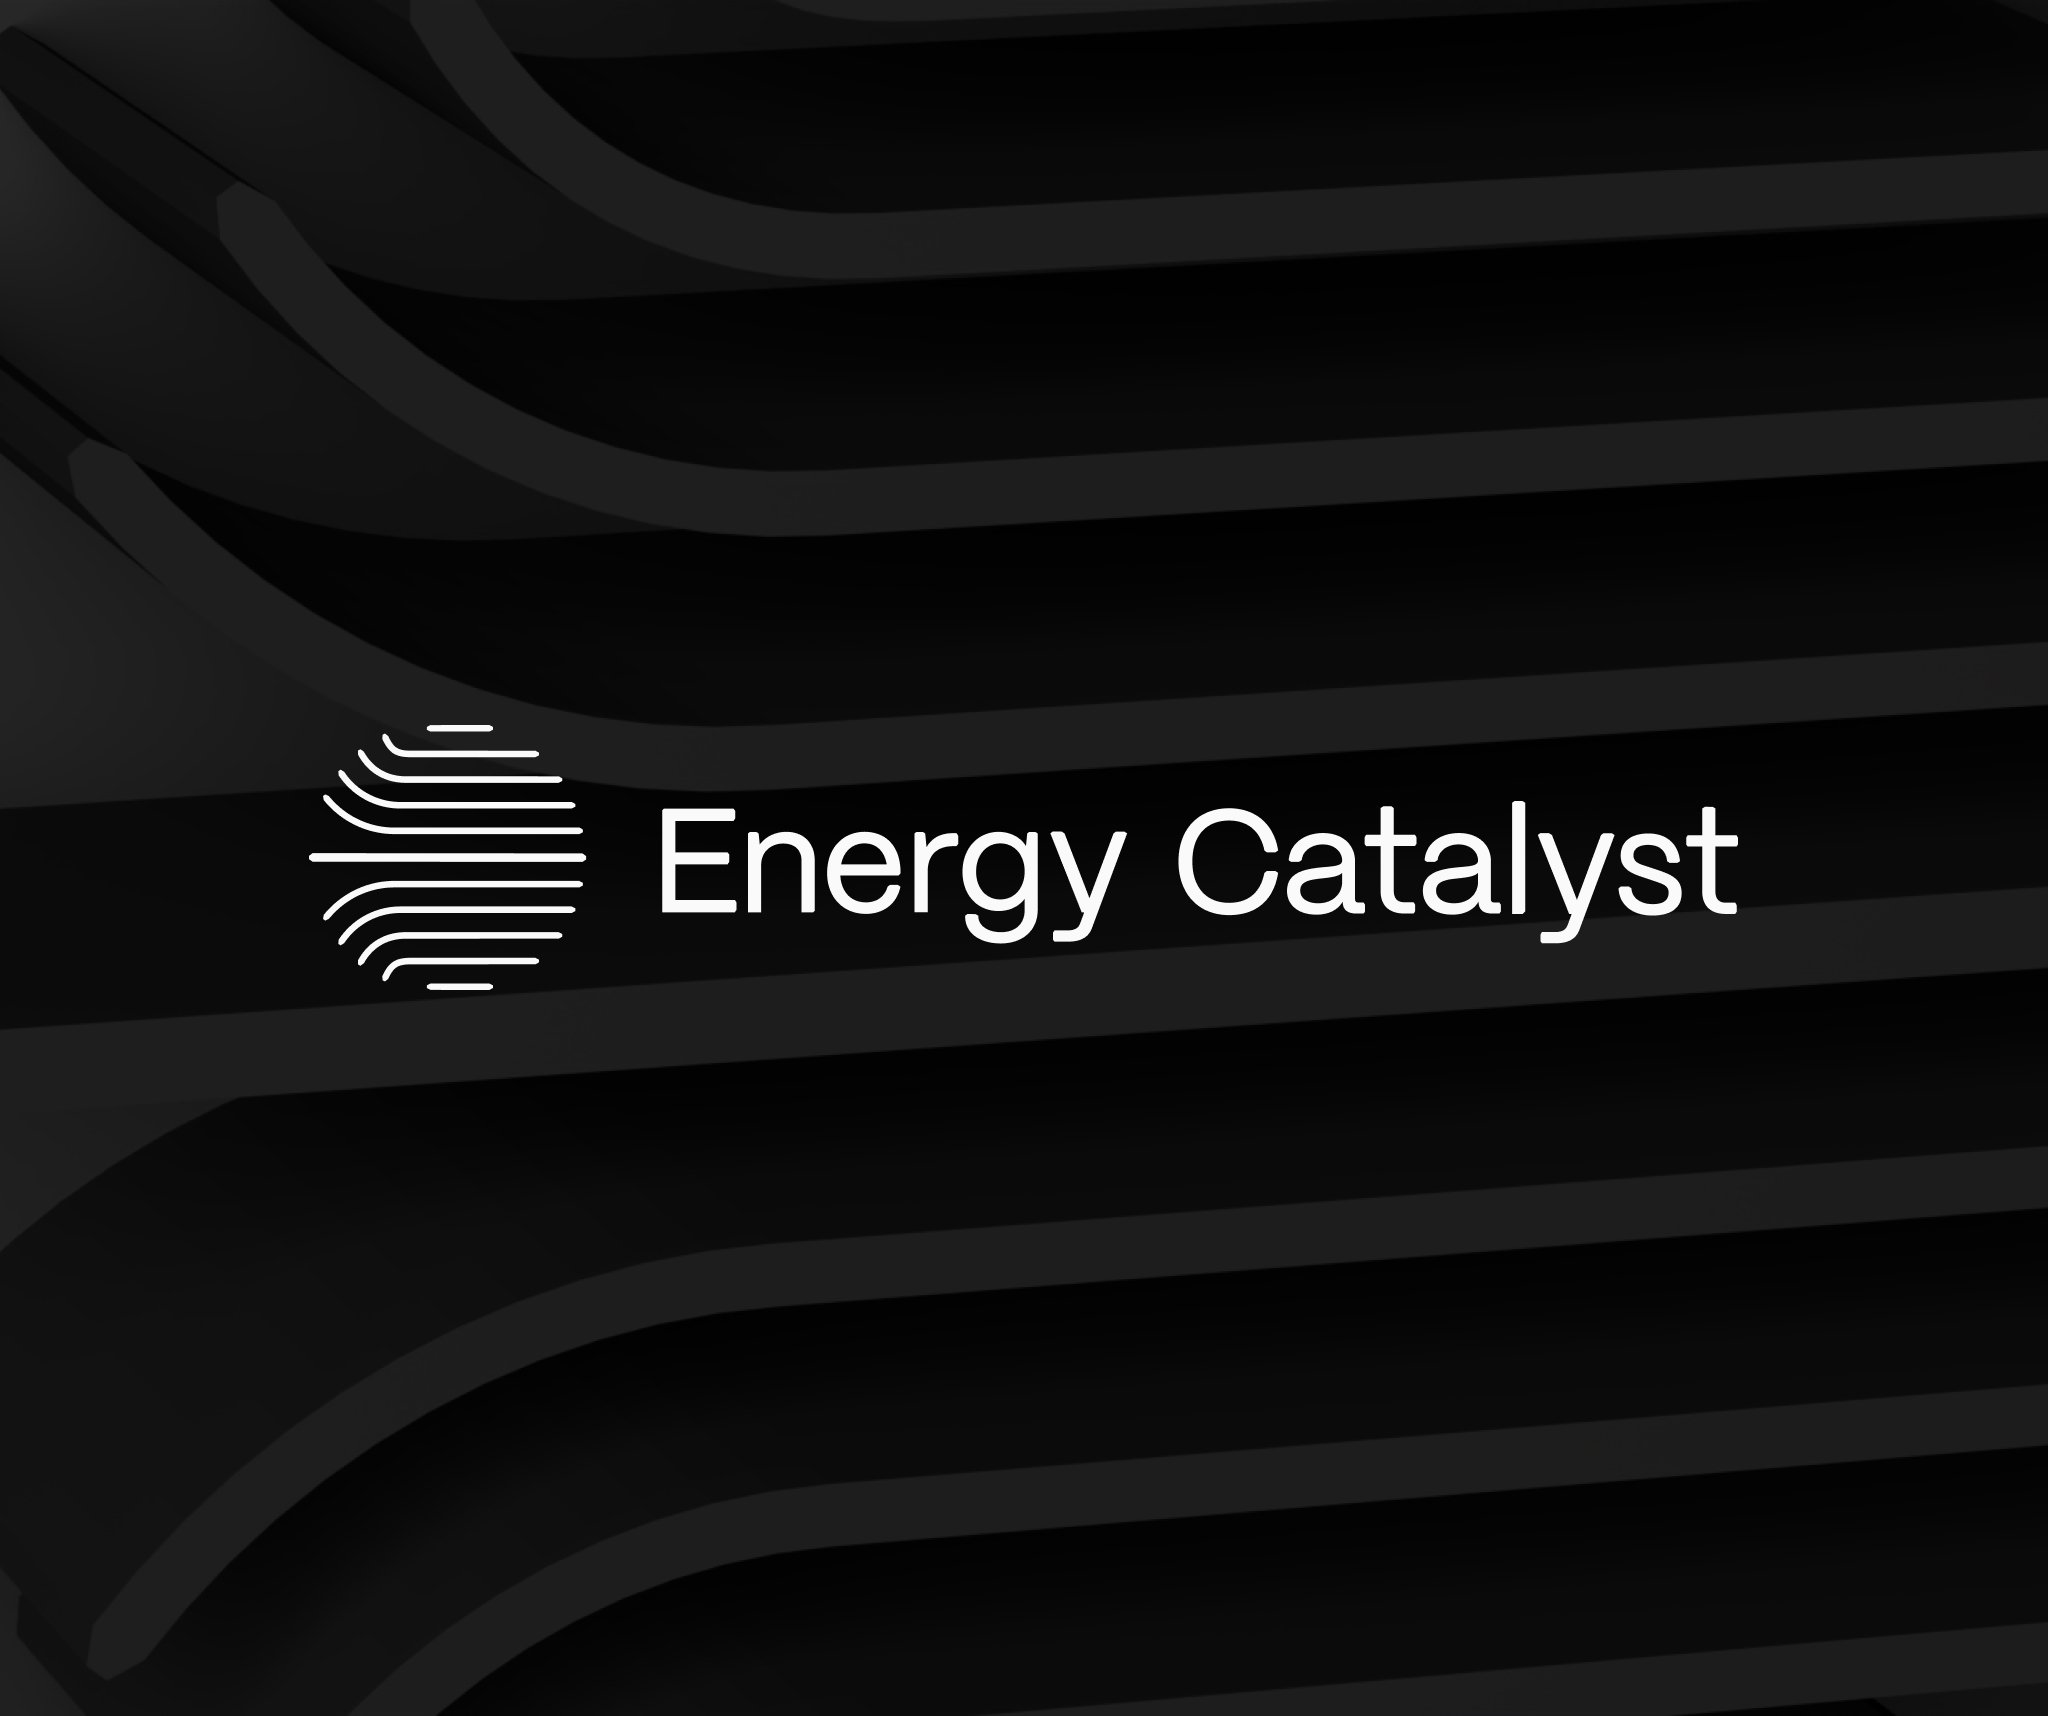 A scale of change for Energy Catalyst